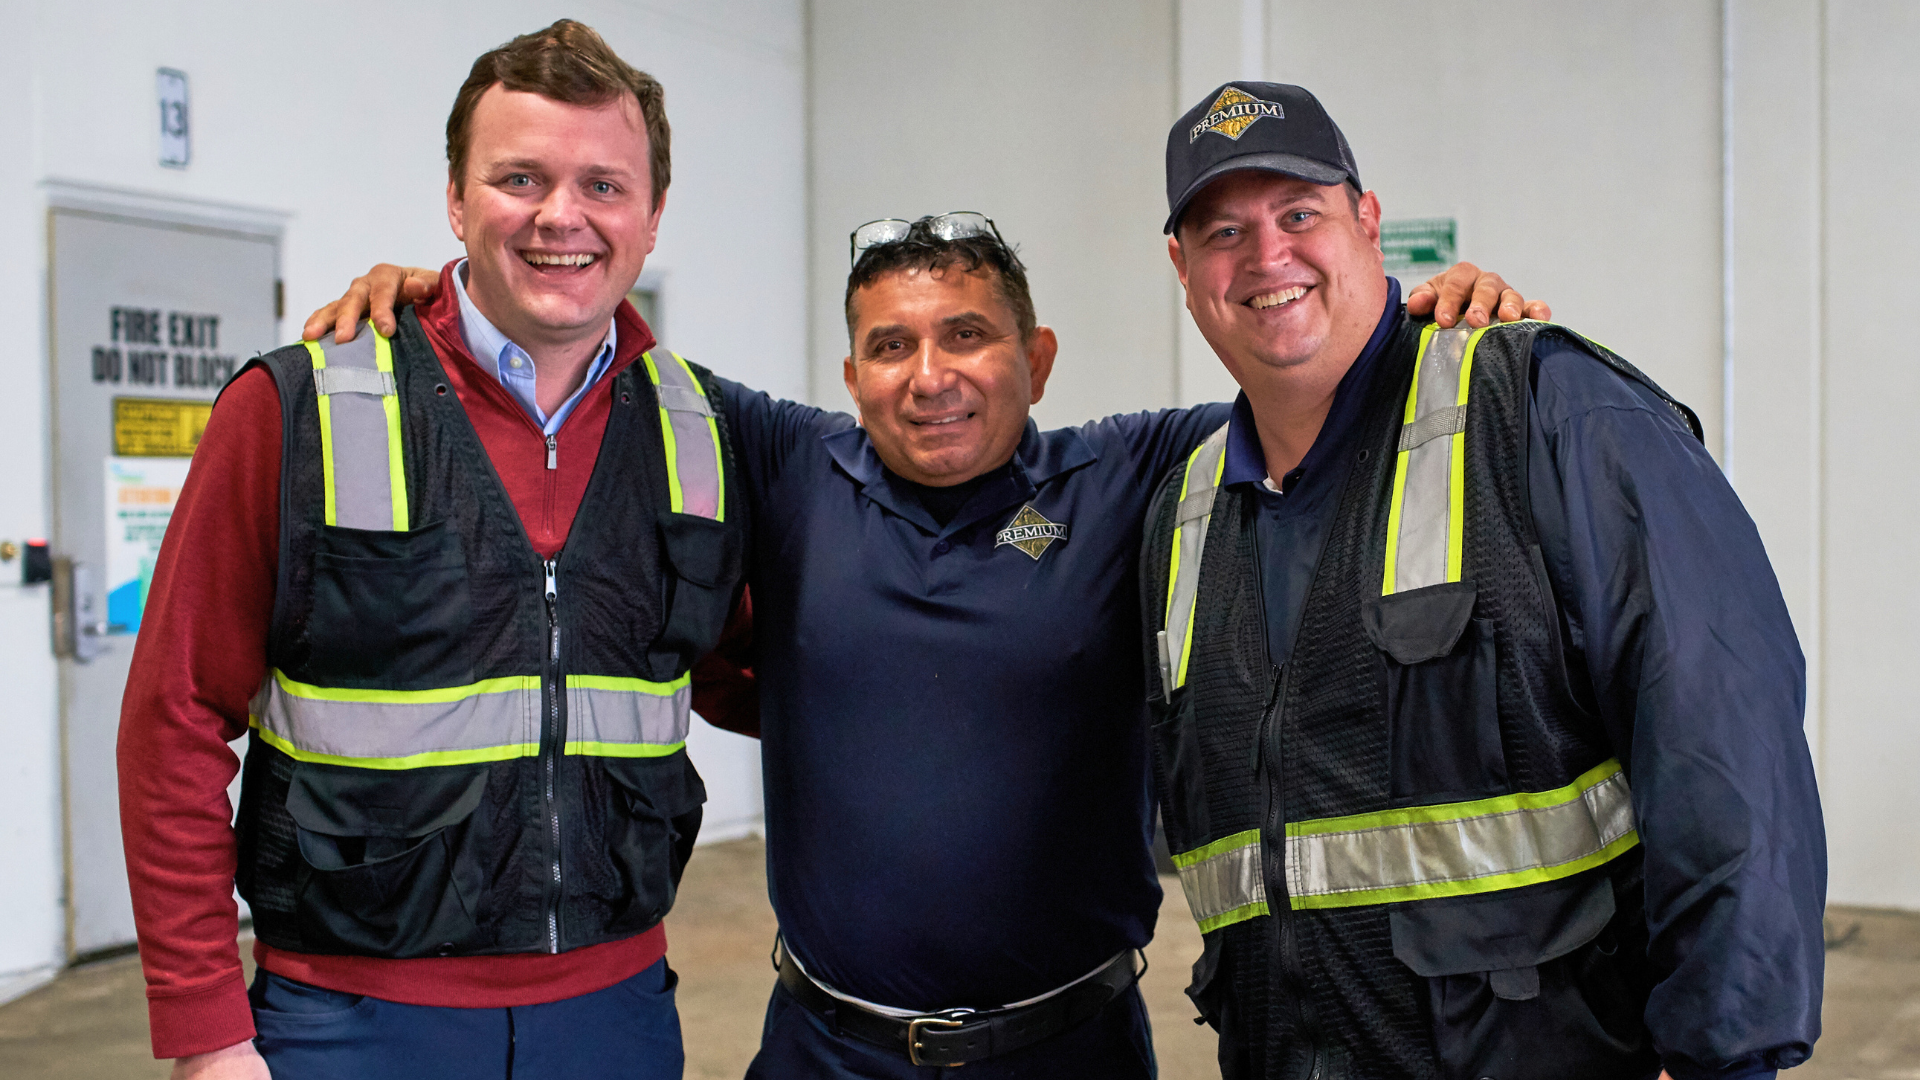 Three people in safety vests smiling in a warehouse